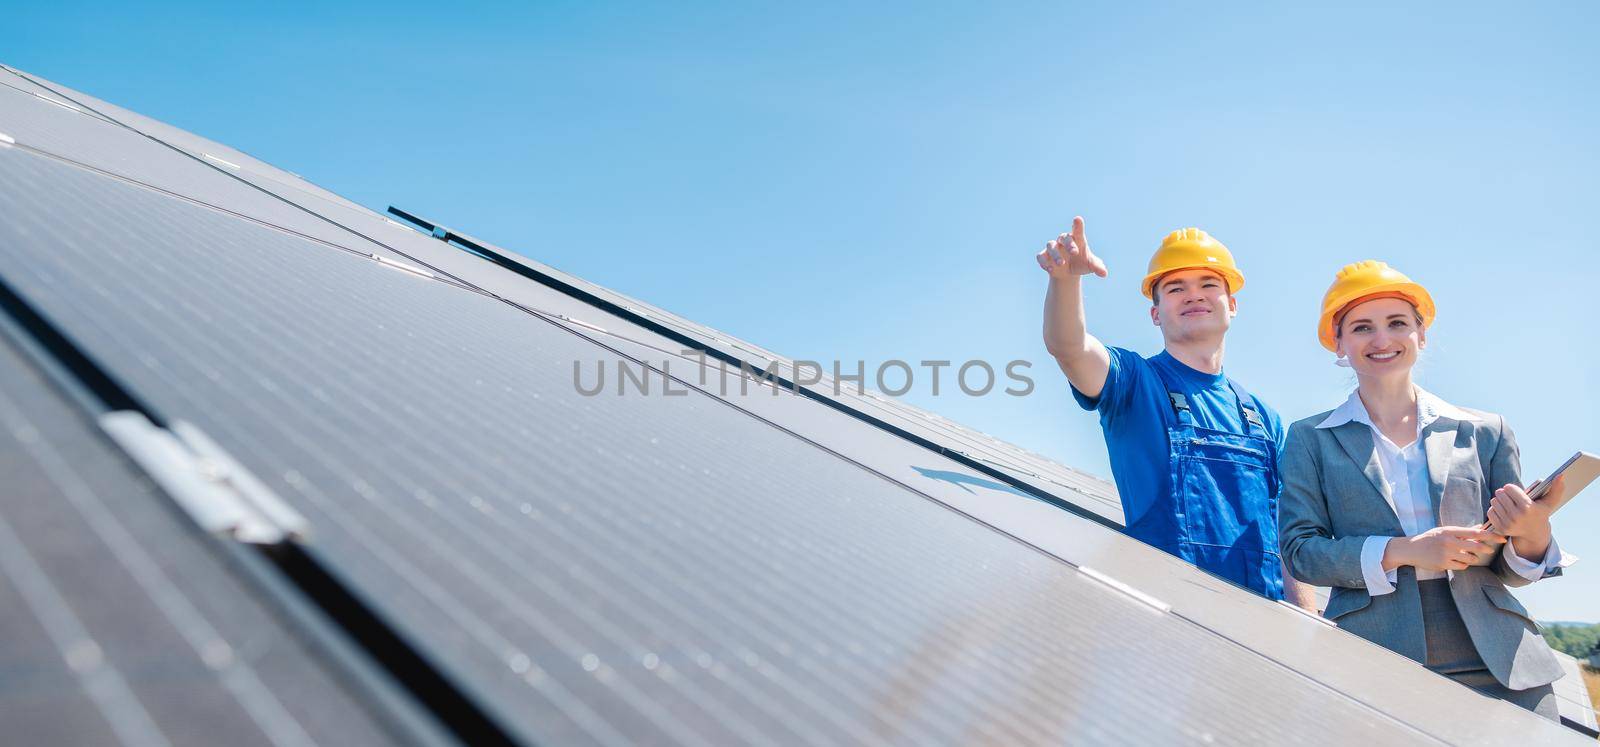 Manager and worker in photovoltaic power plant by Kzenon